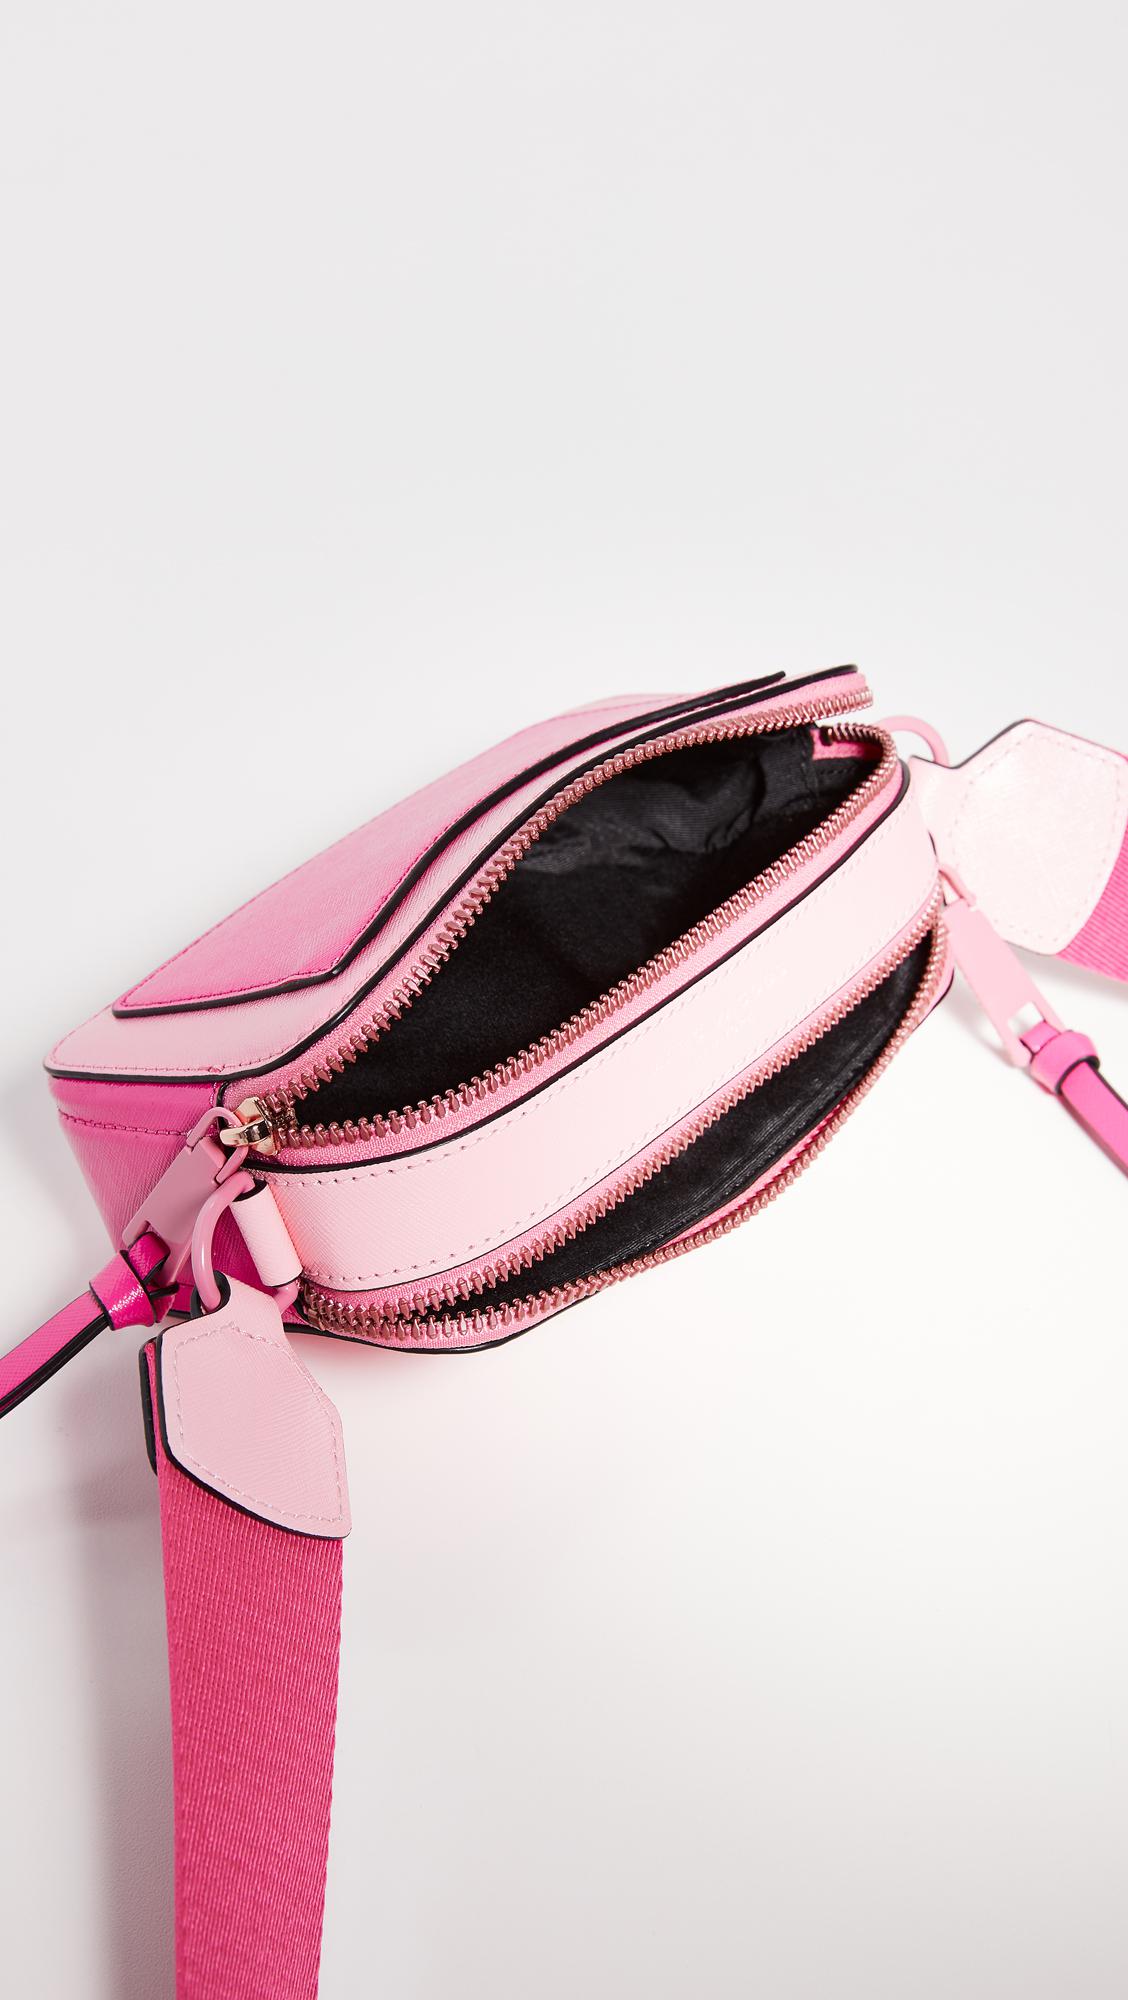 Marc Jacobs Snapshot Camera Bag in Pink | Lyst